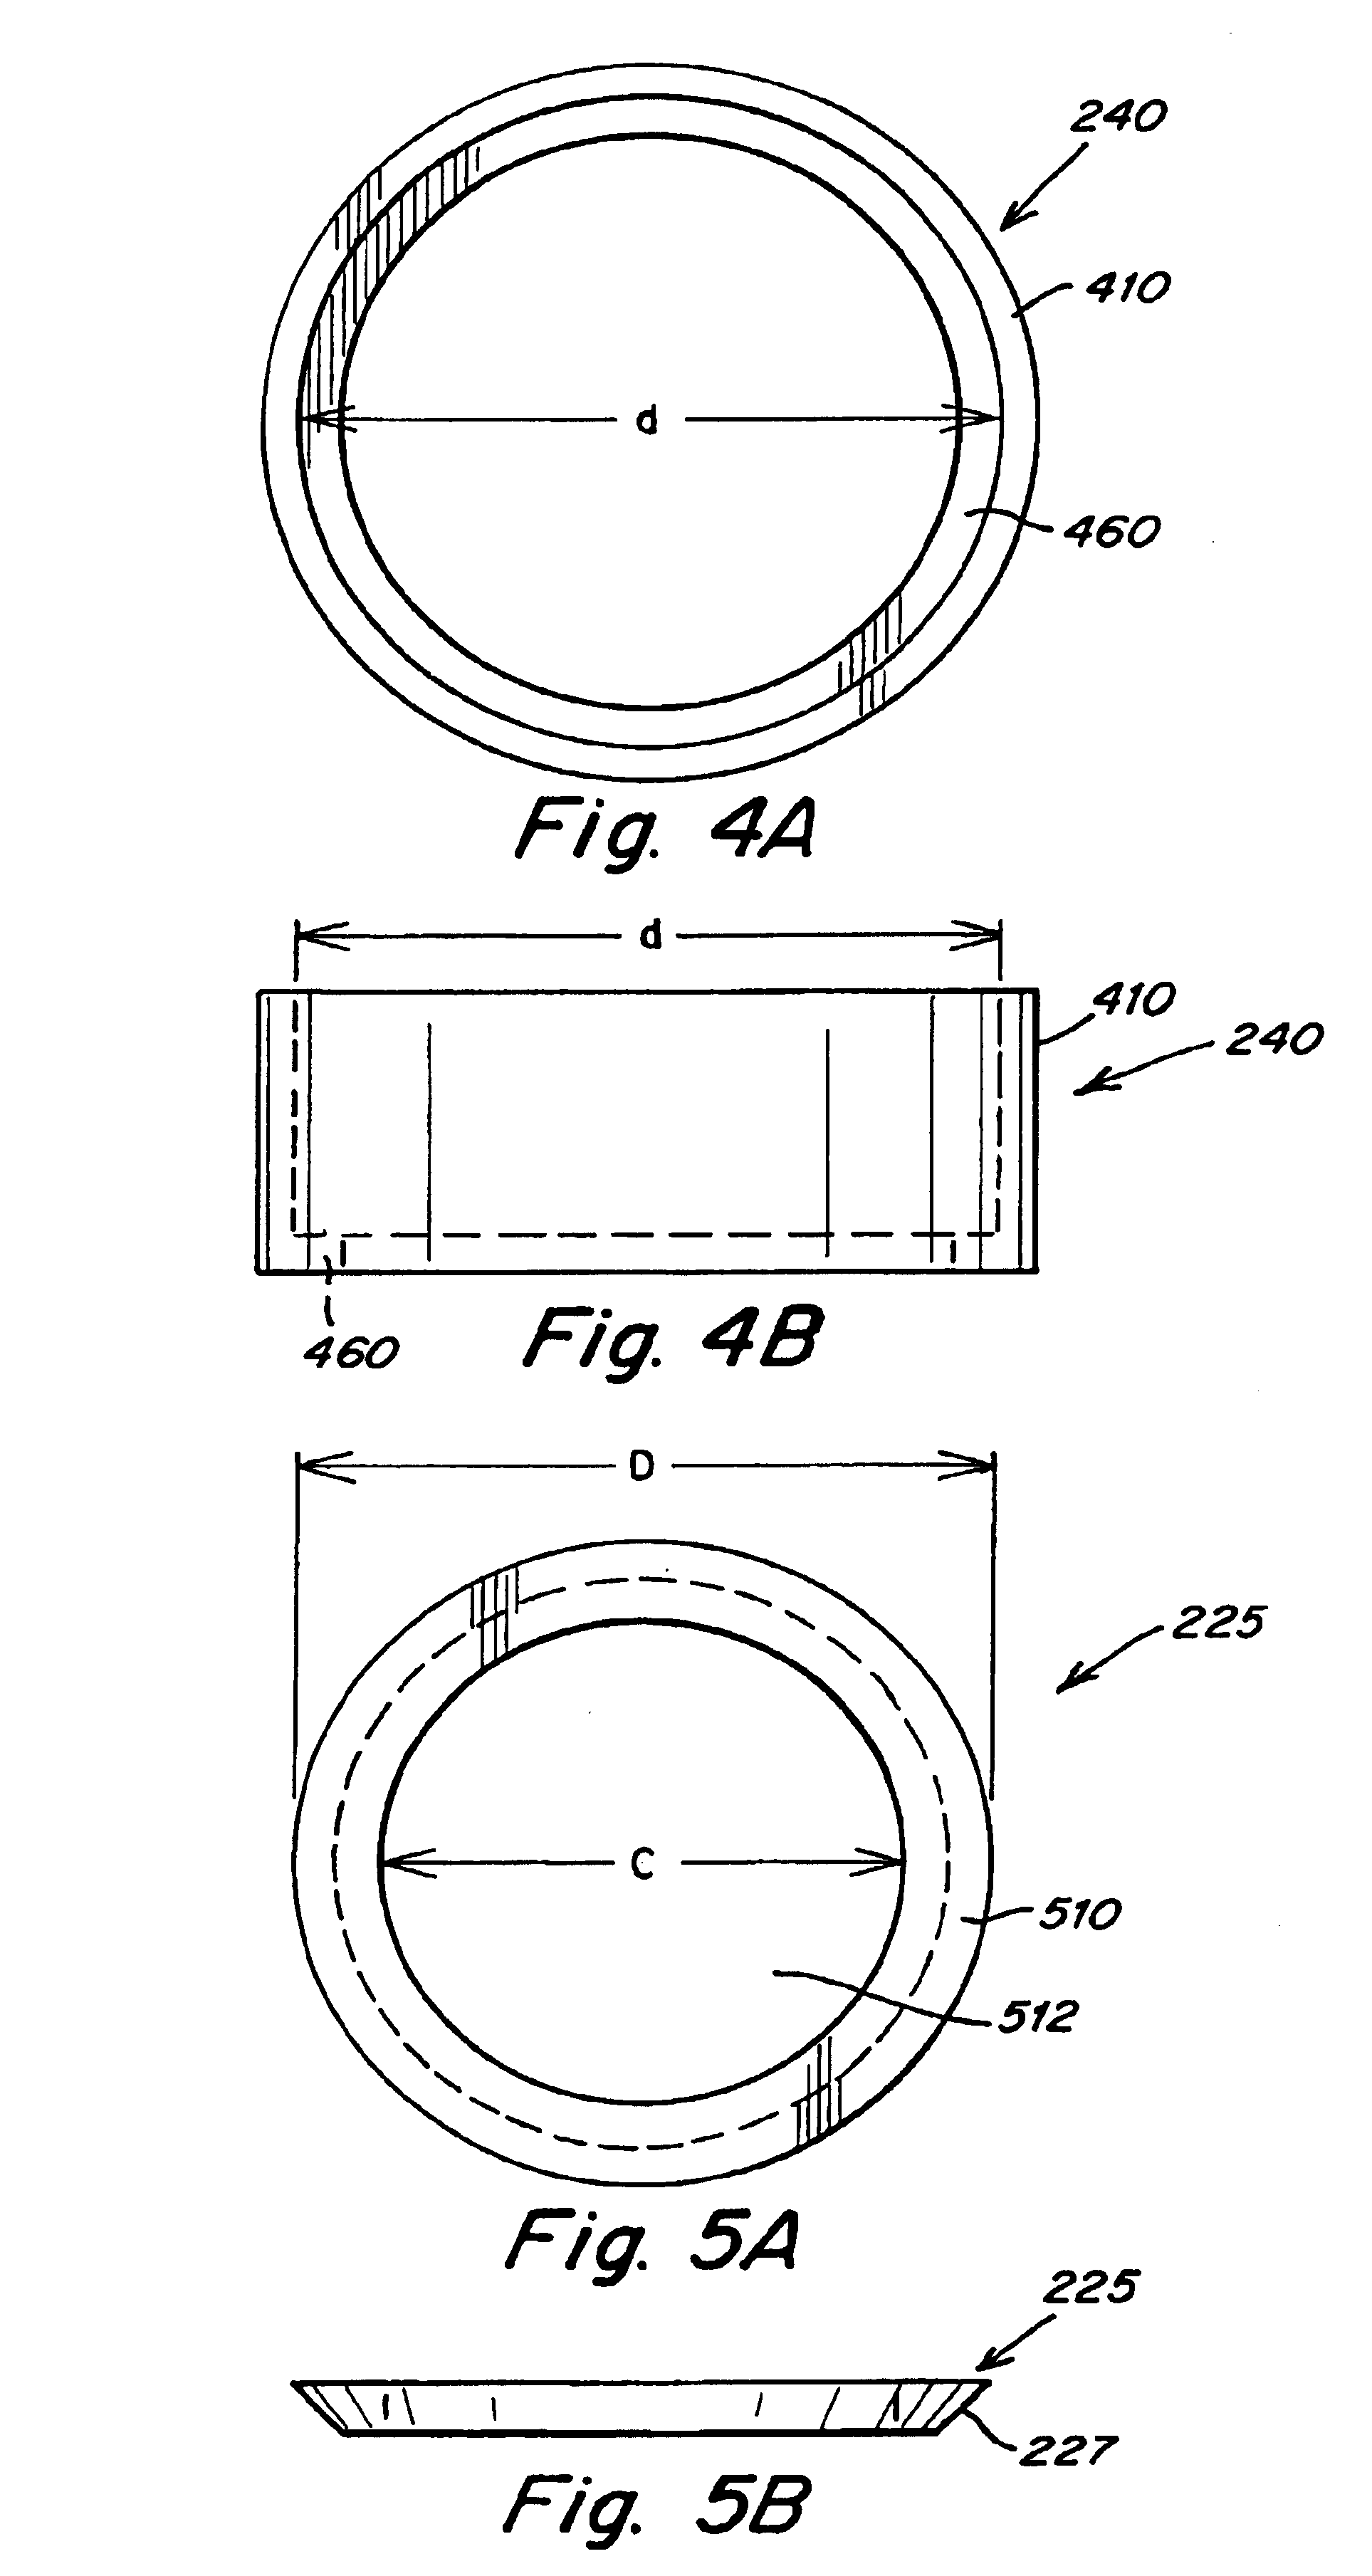 Protective optical filter assembly